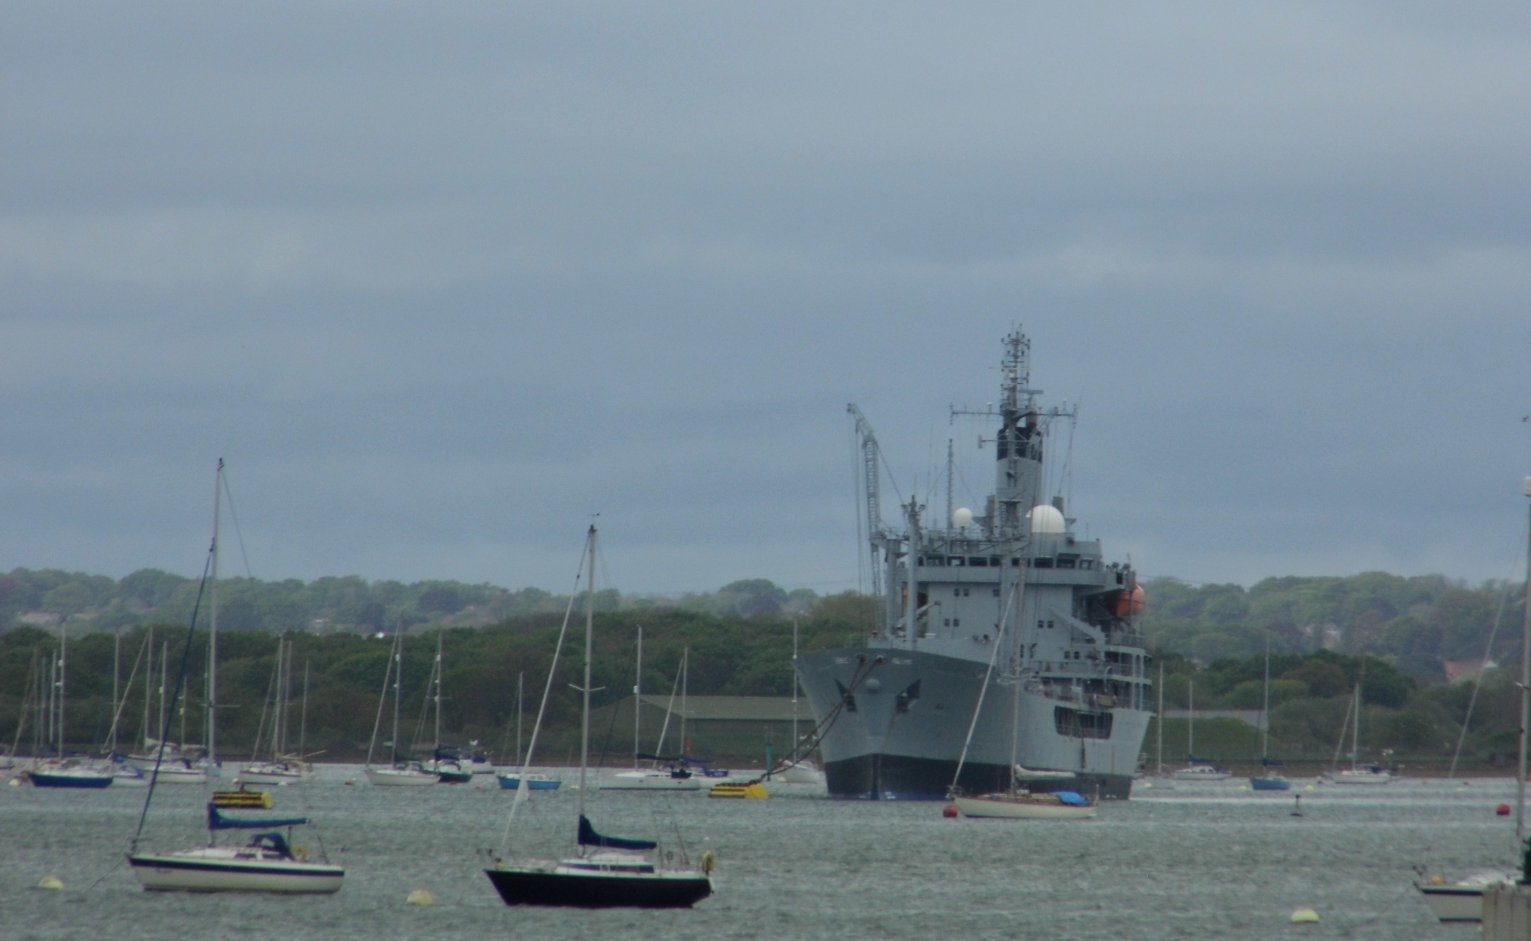 RFA Black Rover, Decommissioned Portsmouth 24 April 2019